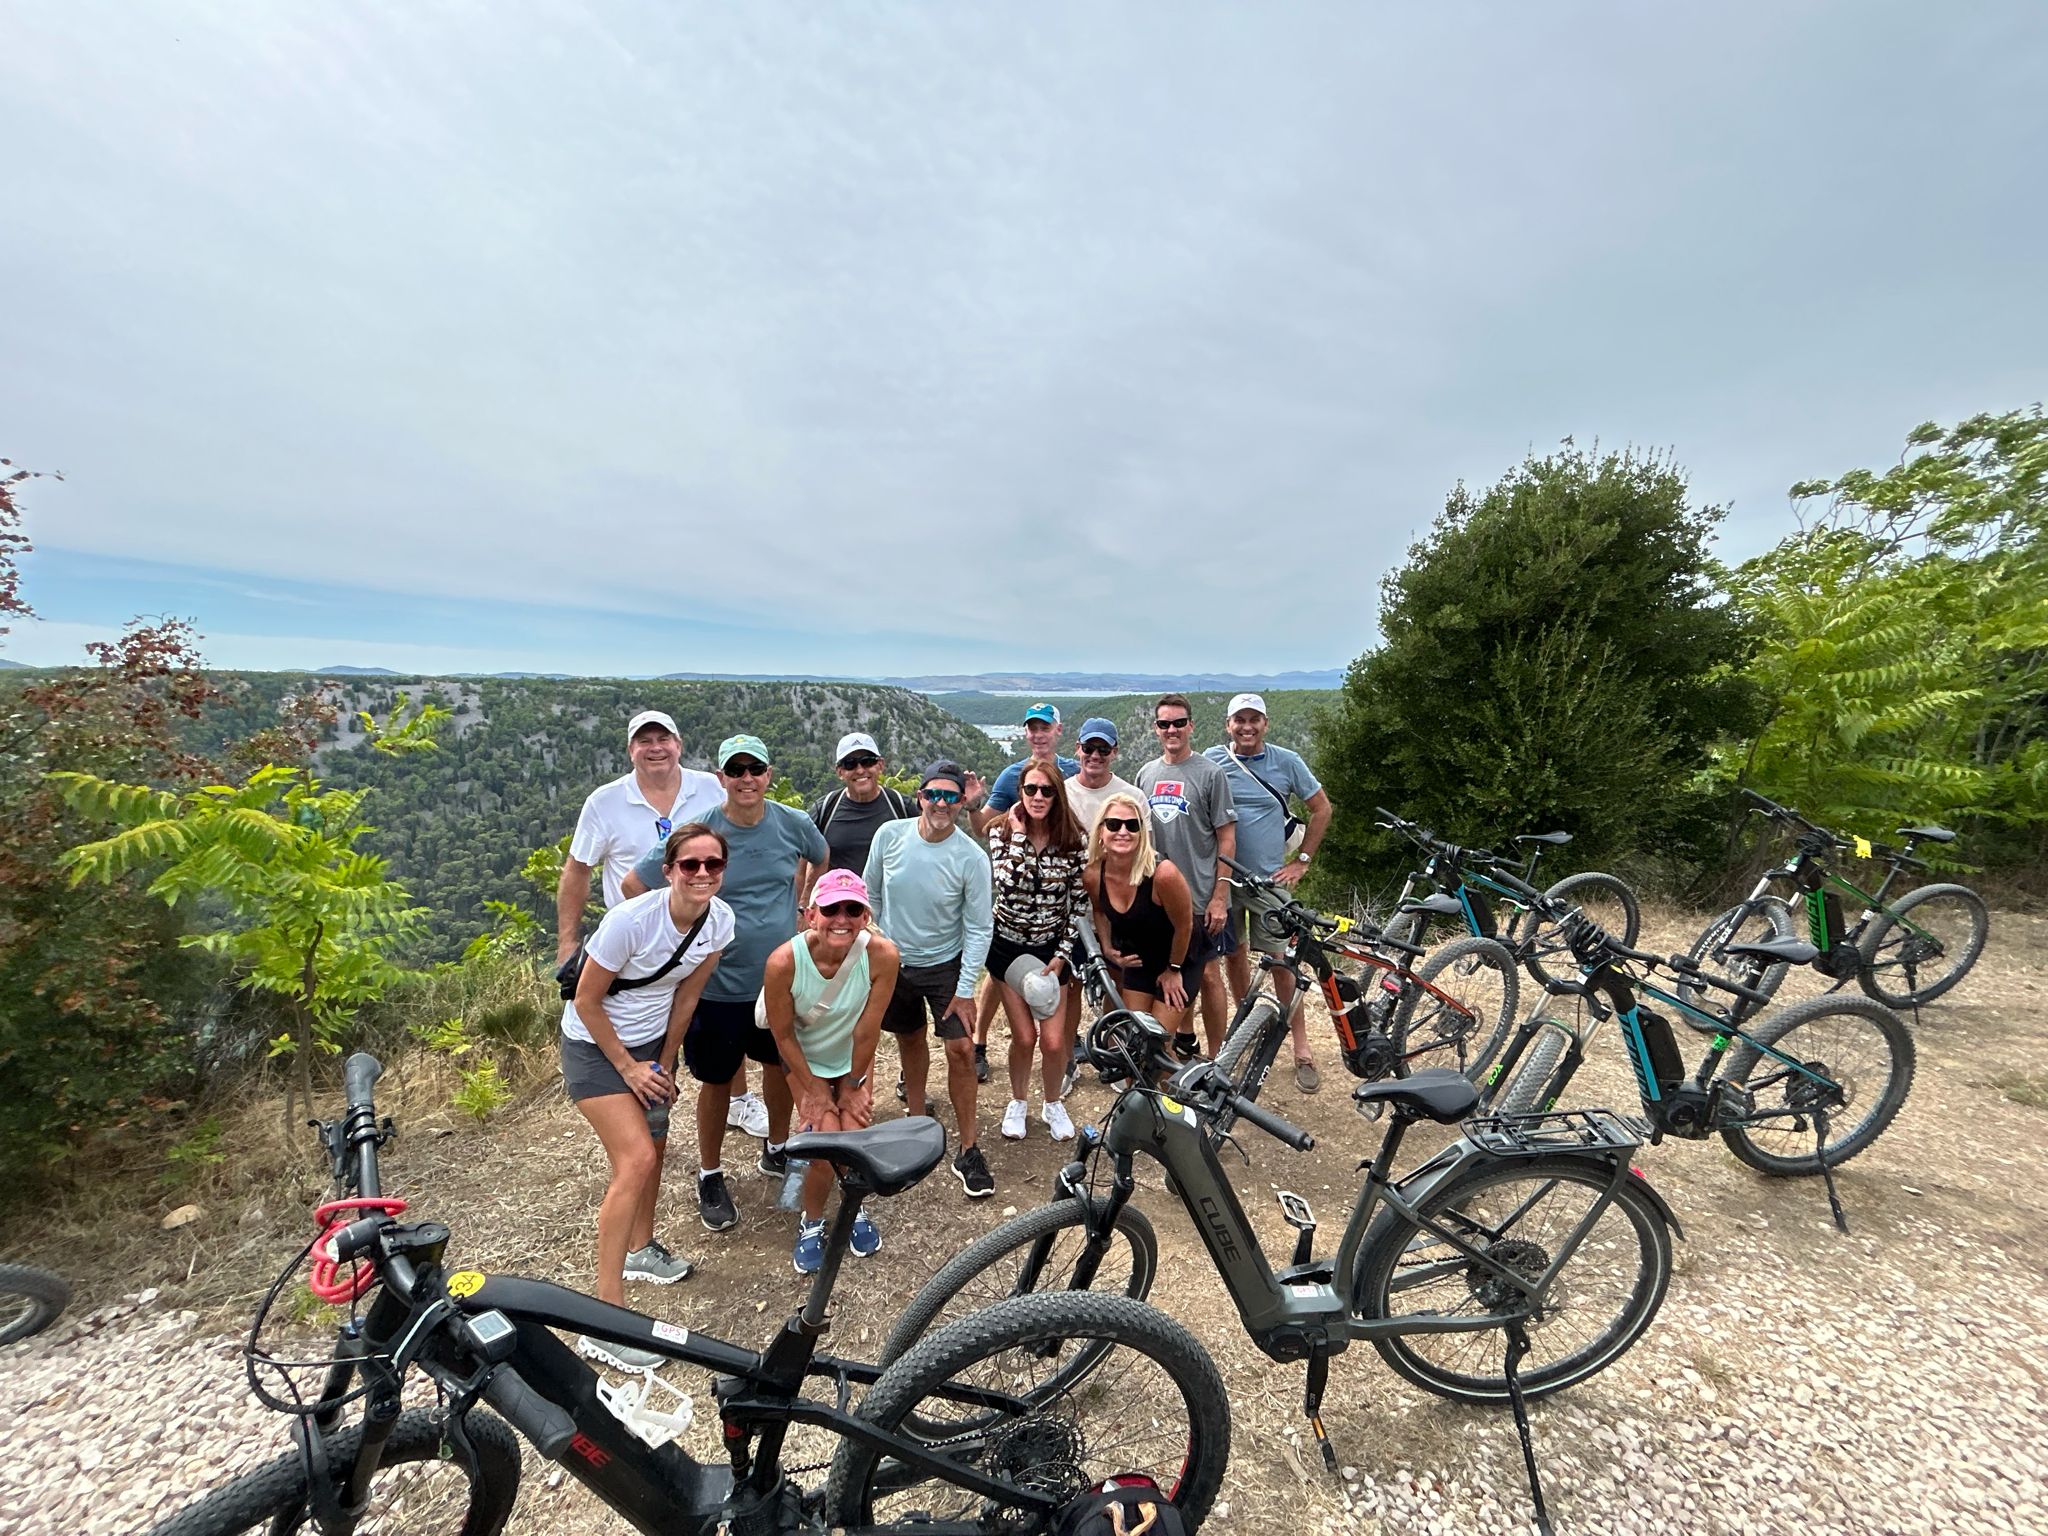 Group of happy bikers posing with their mountain bikes on a gravel trail overlooking a scenic landscape with lush hills and a distant water view